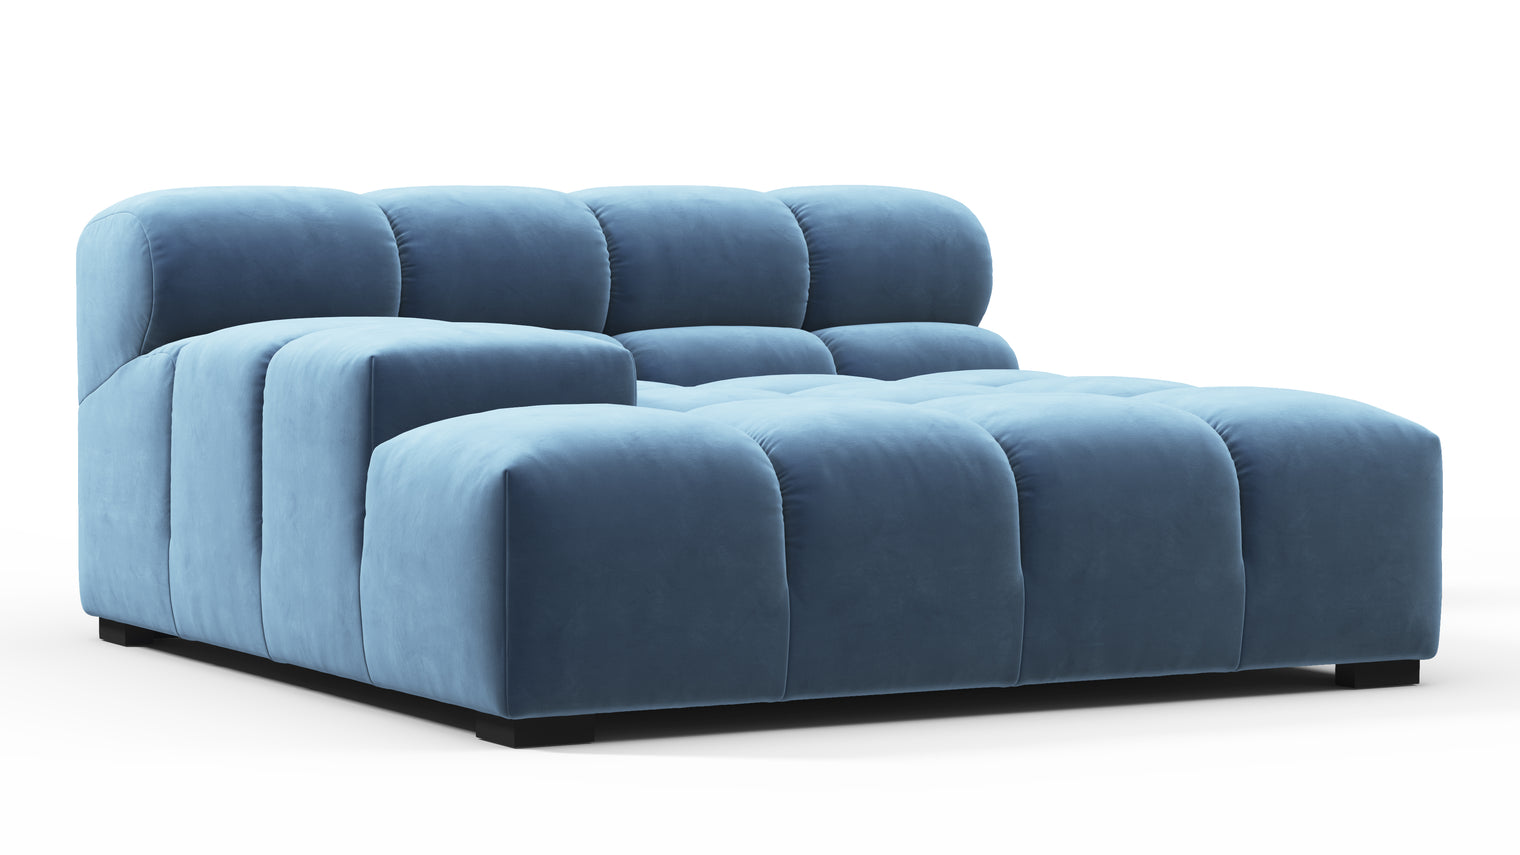 MODULAR MASTERPIECE | A modern take on 70s design, this cloud-like sectional is all about leisurely lounging. Its relaxed, playful aesthetic is adored around the world.
